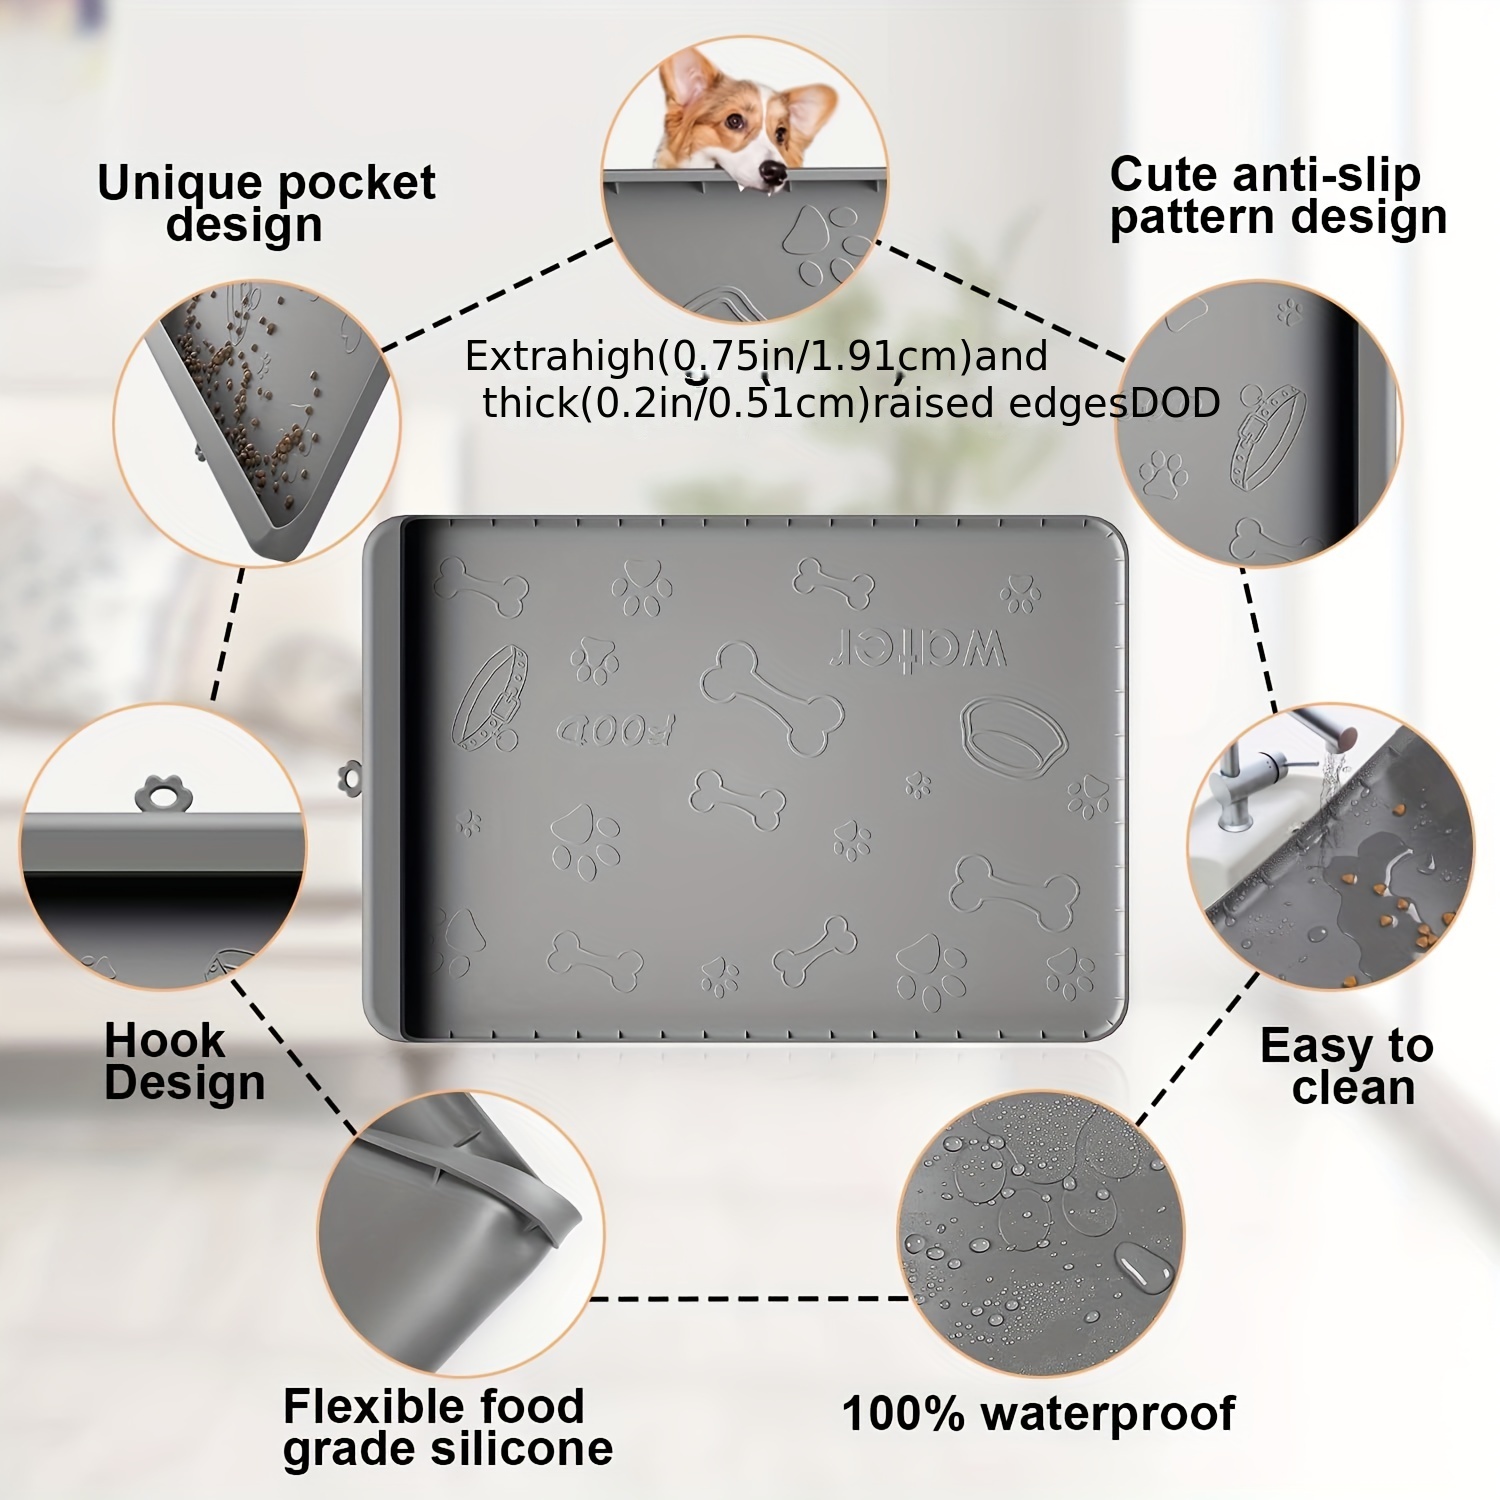 Silicone Pet Mat for Food and Water,Dog Cat Mats for Floors Waterproof,Dog Water Bowl Feeding Mat with Pocket for Catches Spill and Residue Large